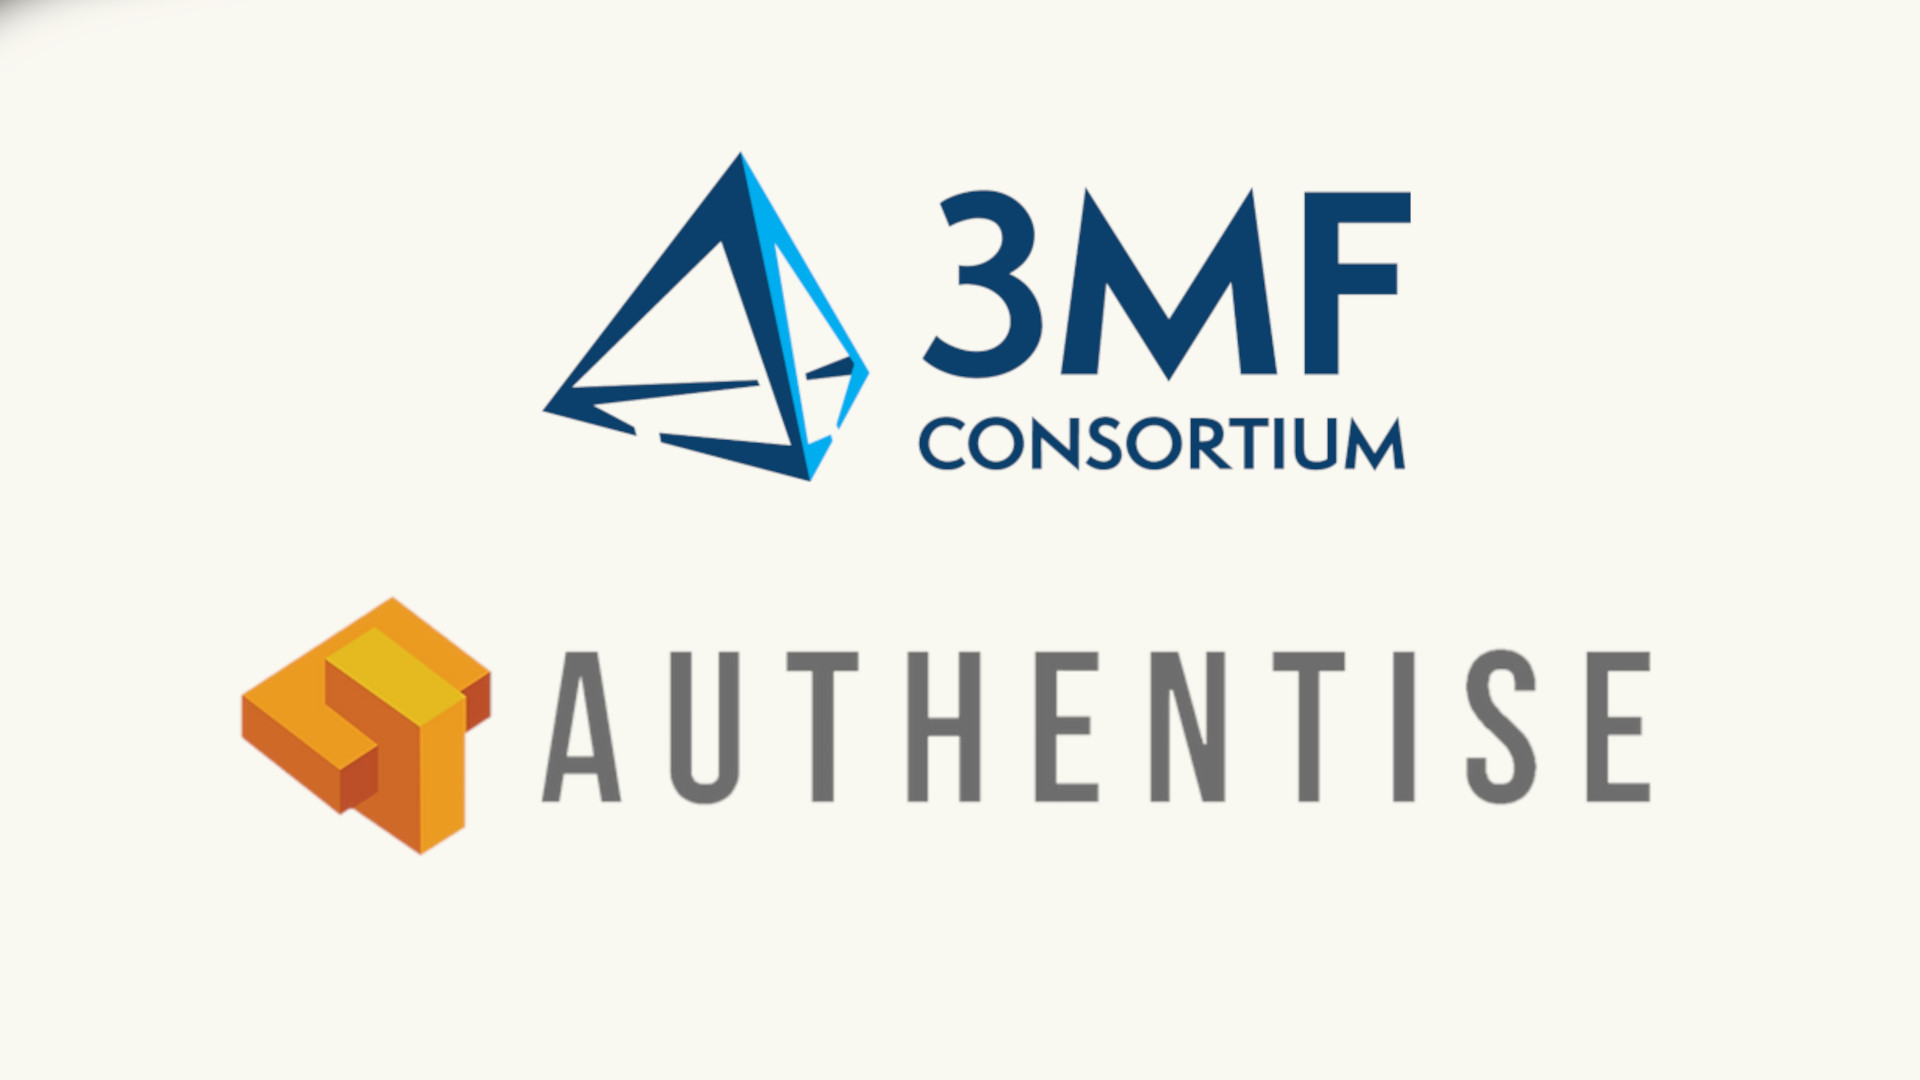 Authentise Join the 3MF Consortium